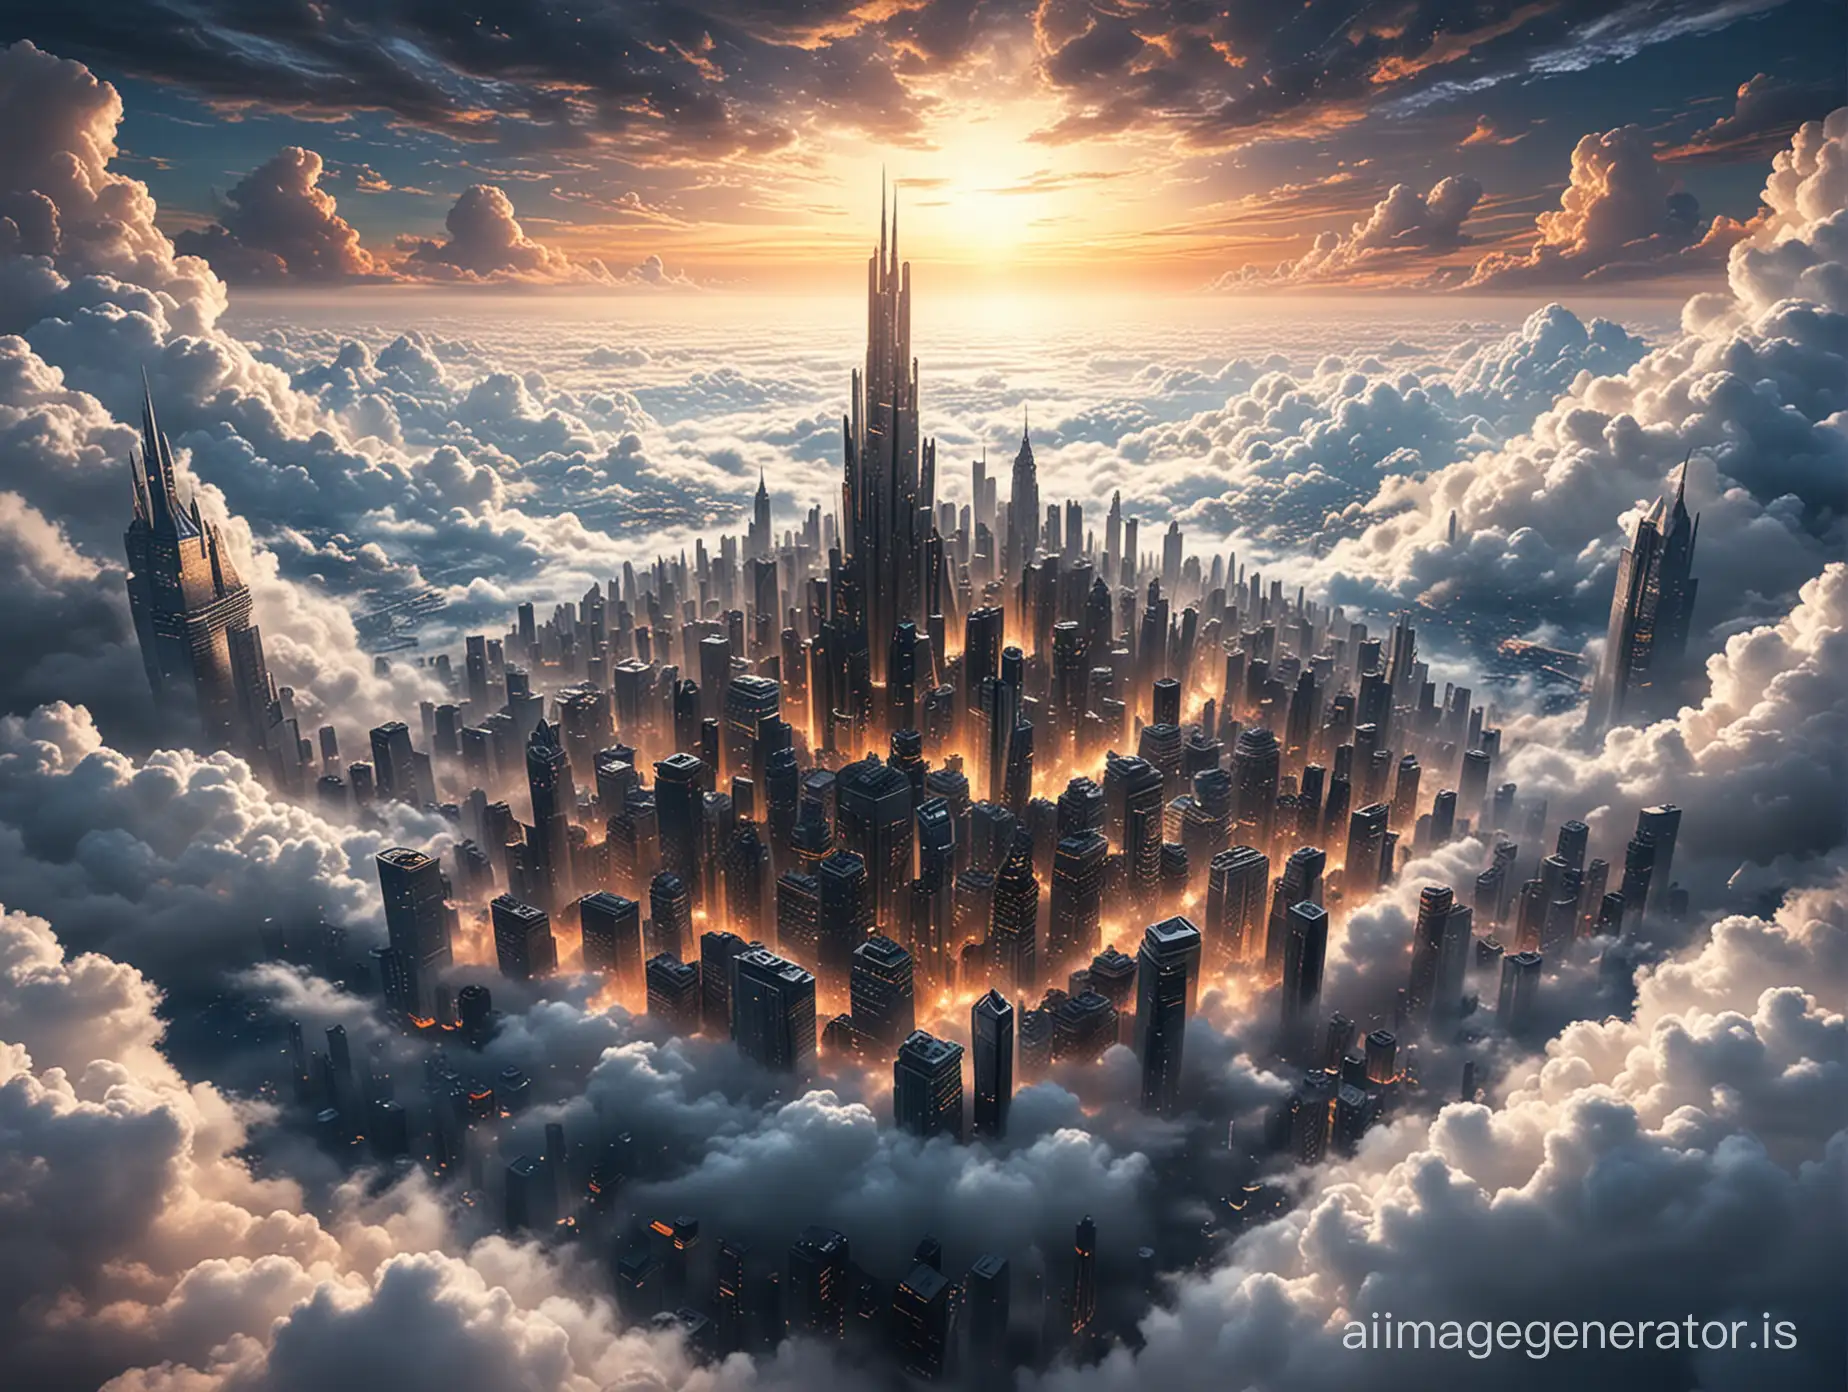 Majestic-Skyline-Spectacular-Cityscape-in-the-Clouds